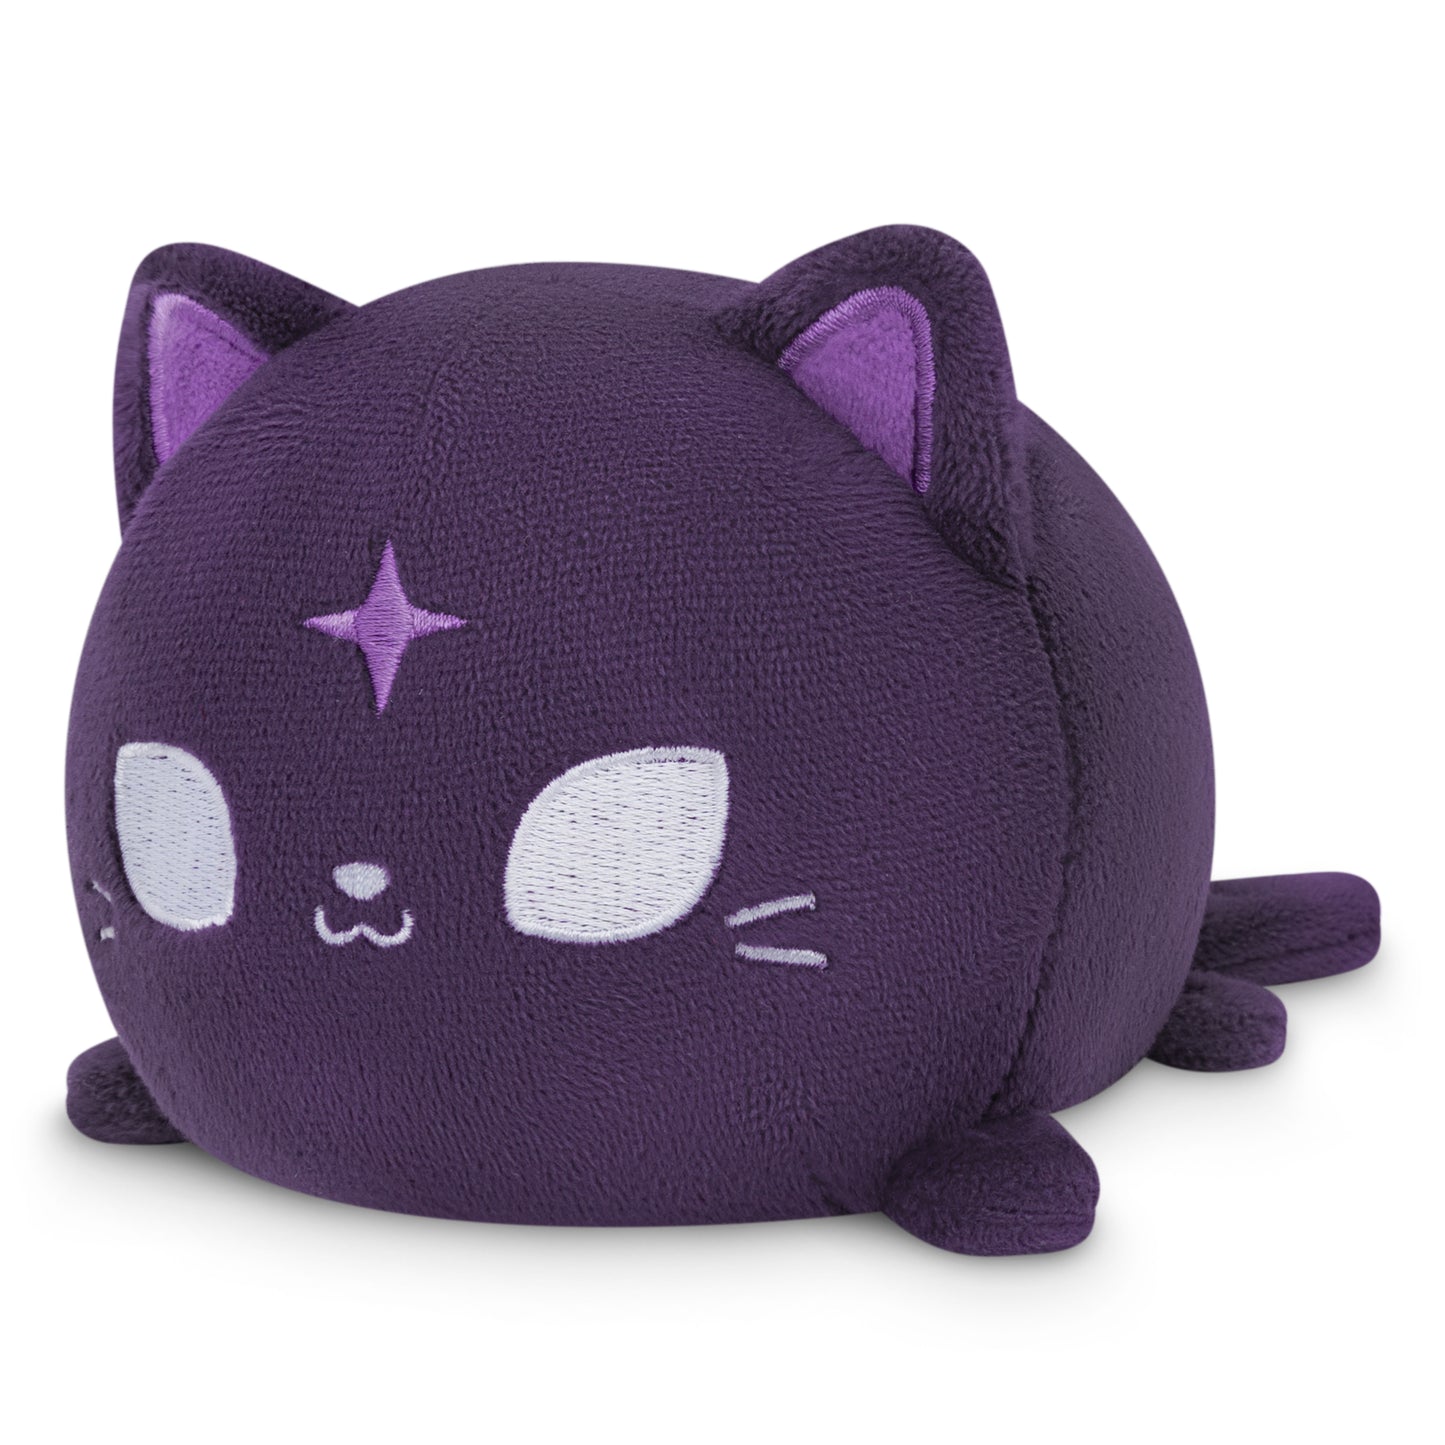 A Plushiverse Witchy Whiskers Cat Plushie Tote Bag decorated with stars, perfect for storing in a secret tote bag or velcro storage pouch alongside other TeeTurtle plushies.